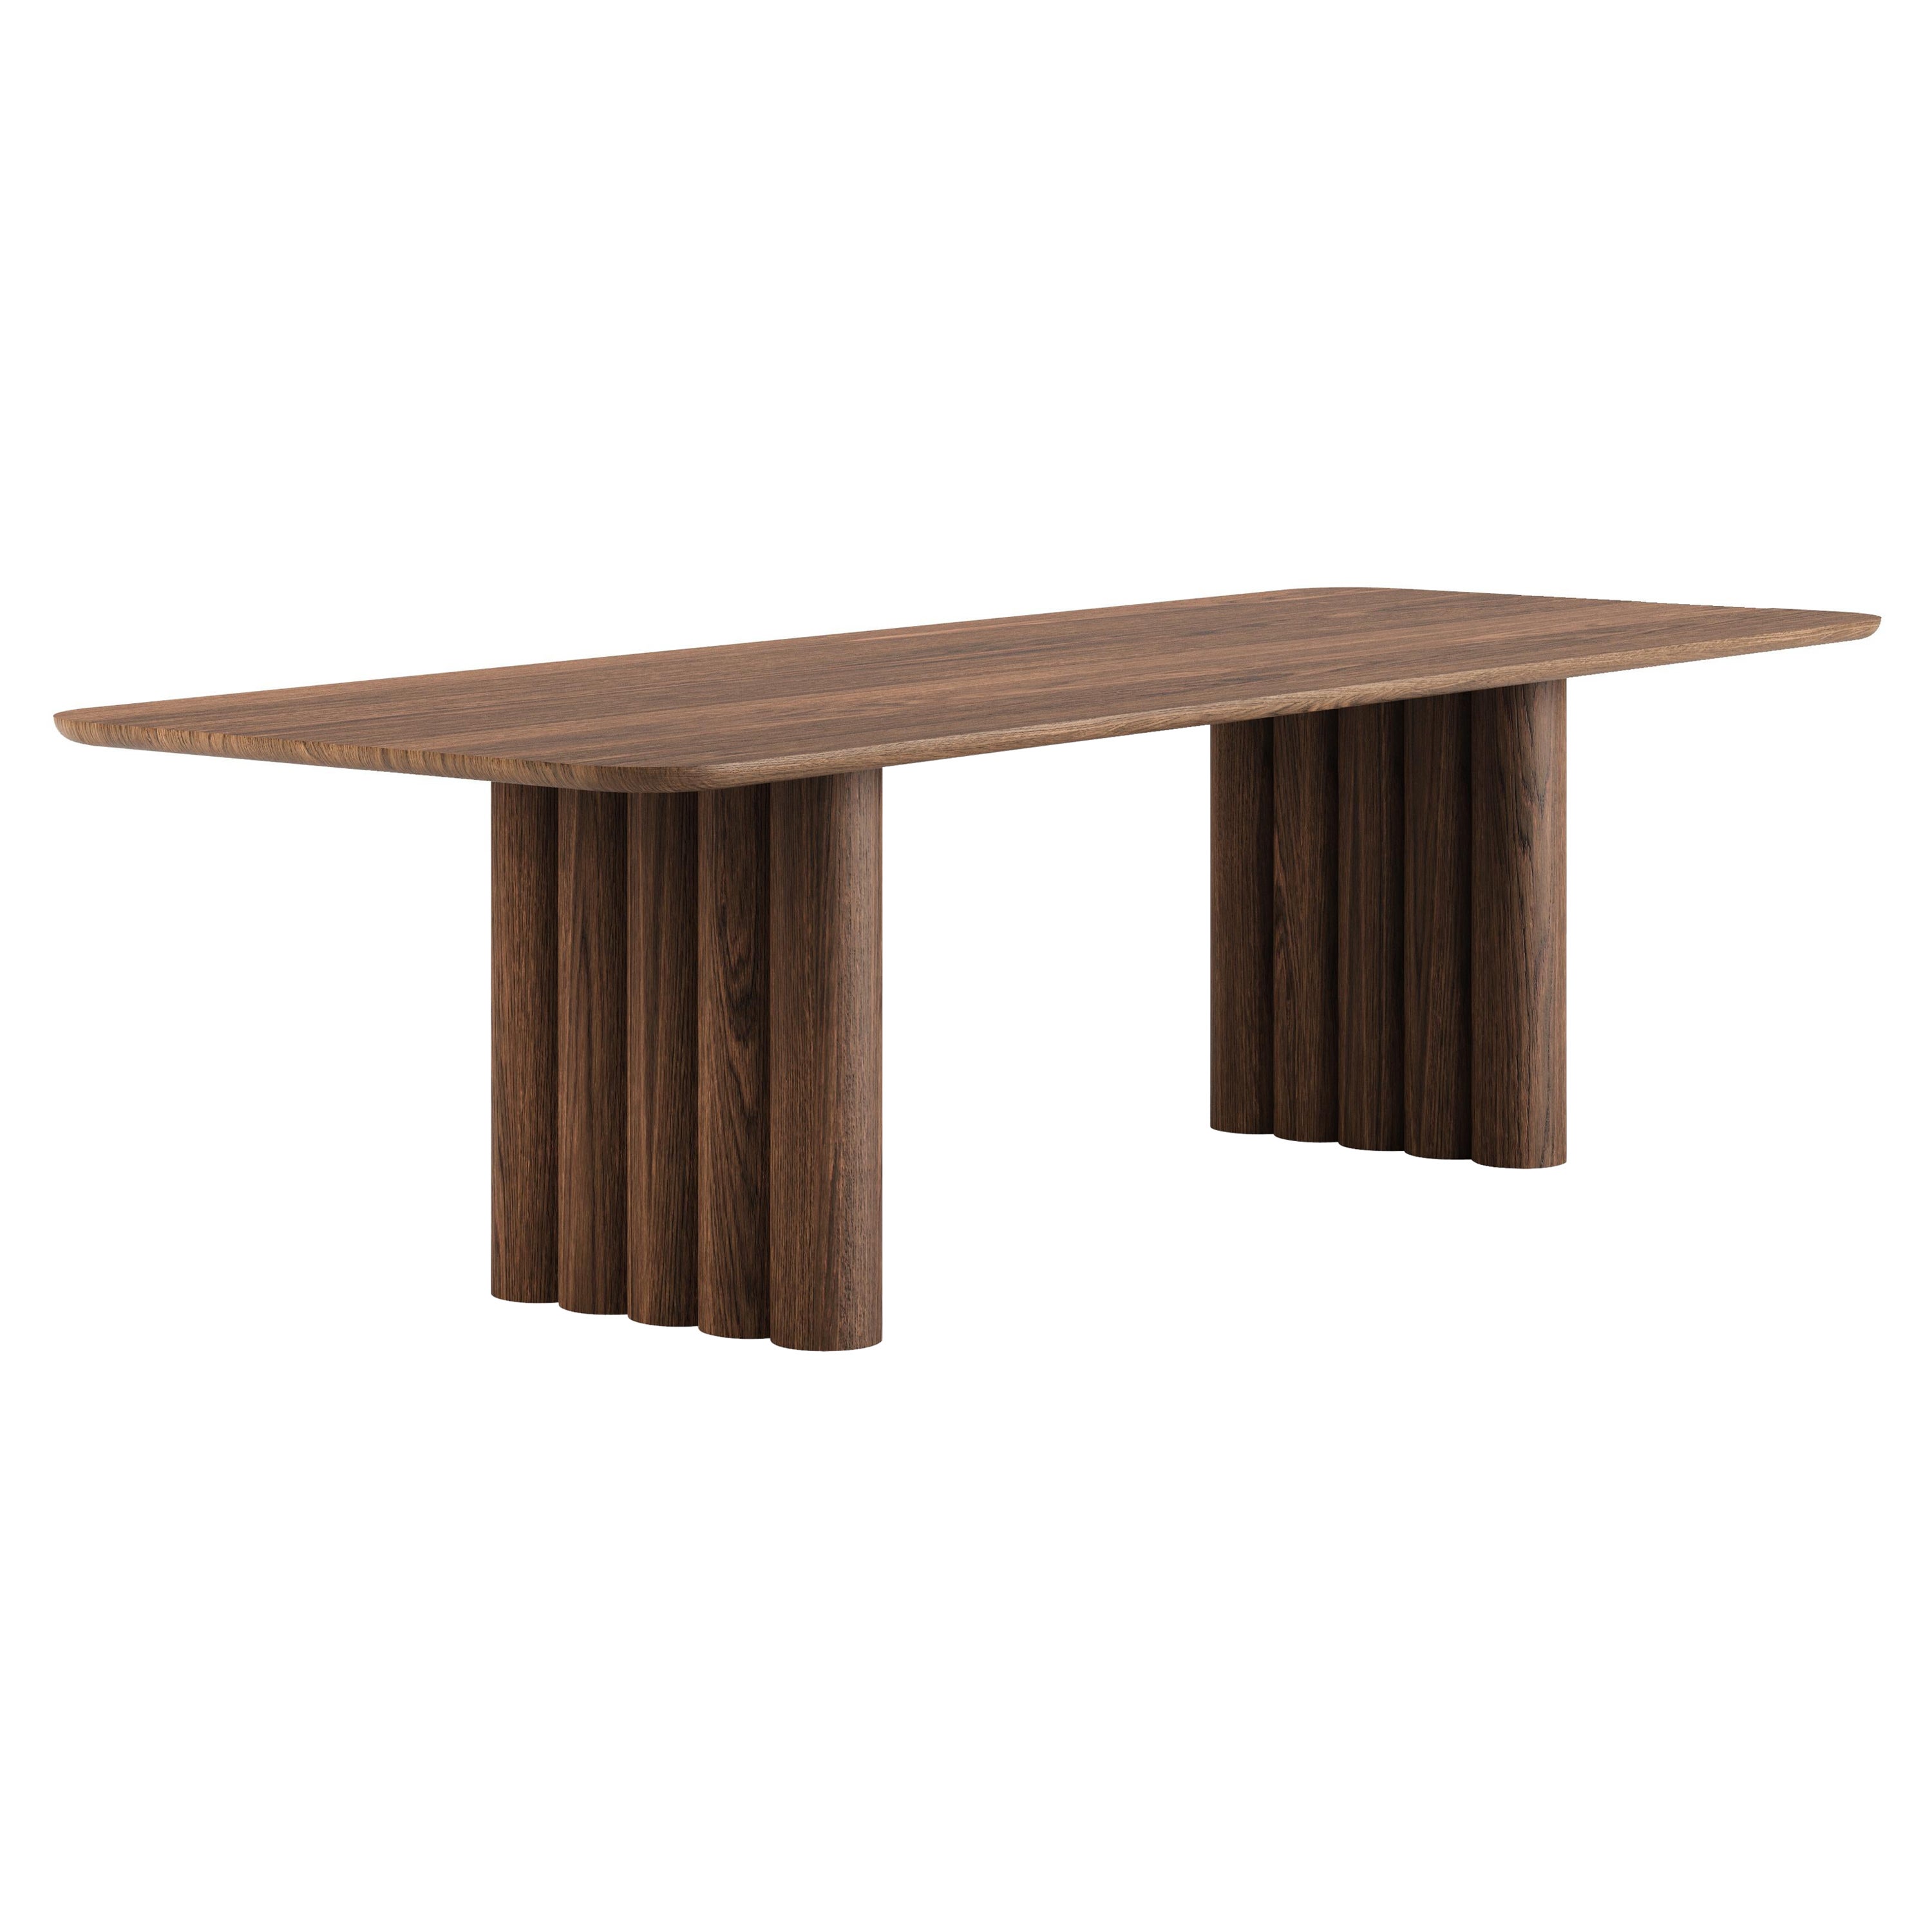 Contemporary Dining Table 'Plush' by Dk3, Smoked Oak or Walnut, 300, Rectangular